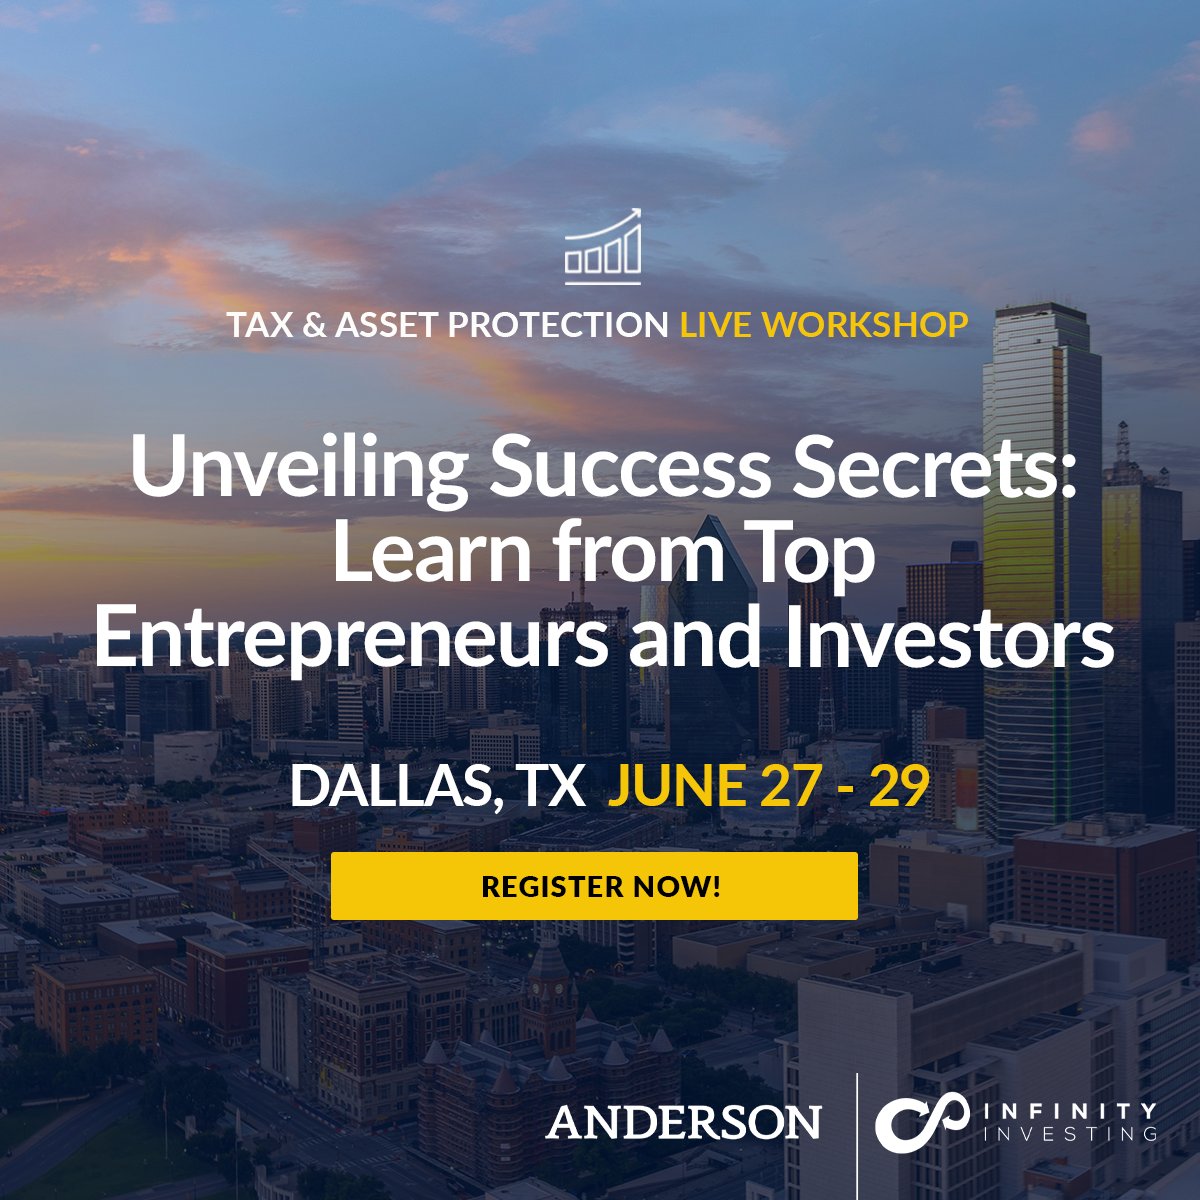 Unlock the keys to financial security at our Tax & Asset Protection Workshop in Dallas, Texas, on June 27-29, 2024! Reserve your spot now to take control of your financial future. bit.ly/4ajpuzD

#AssetProtection #TaxStrategies #FinancialEducation